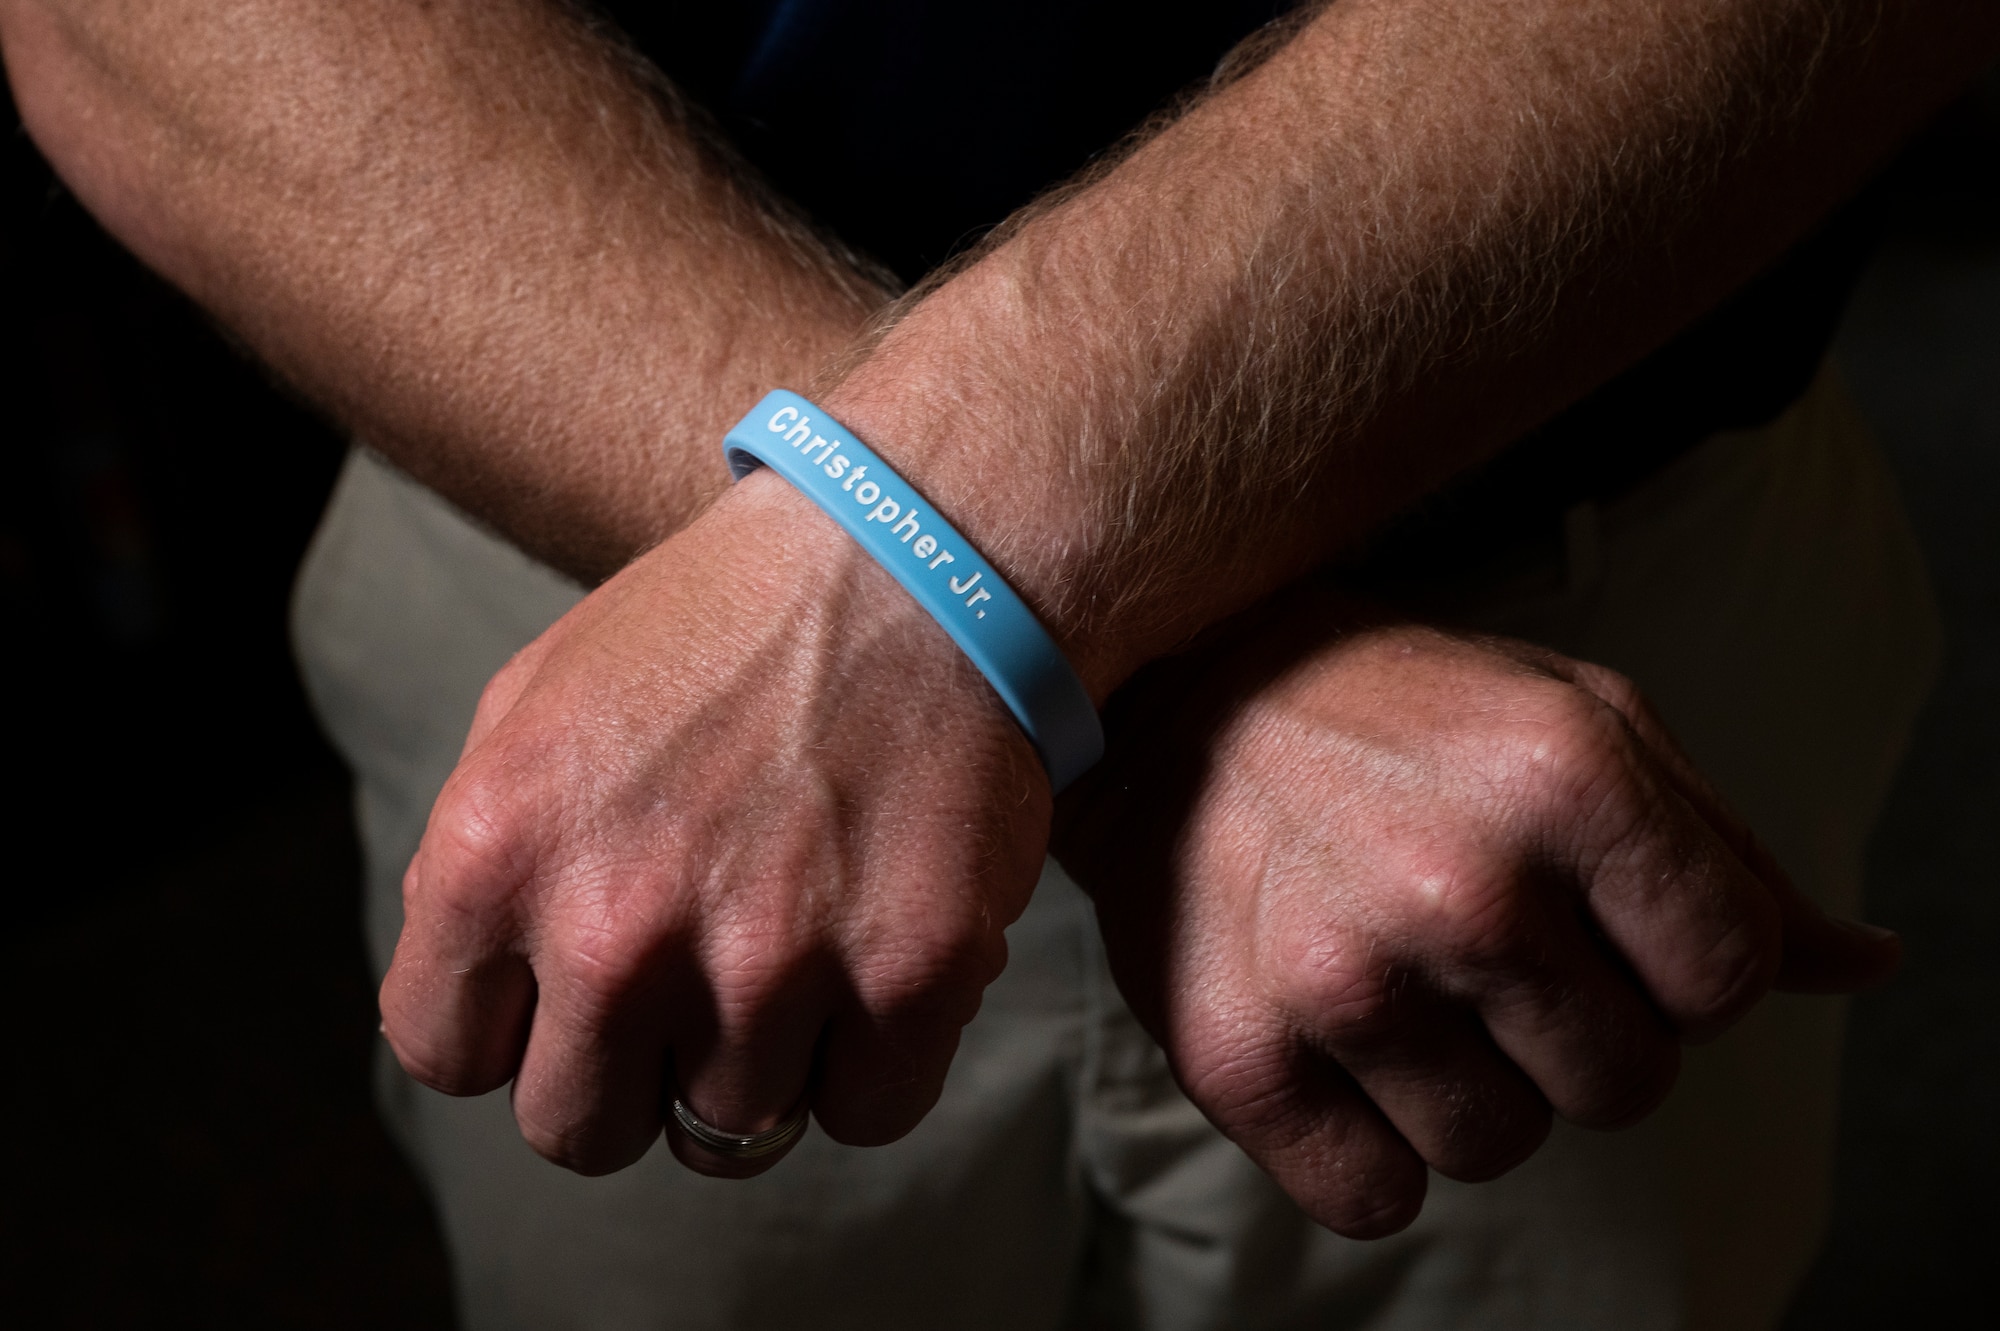 Christopher Schlachter Sr., wears a bracelet in memory of his son, Christopher Schlachter Jr., in O'Fallon, Illinois, June 10, 2022. In order to carry on his name, Schlachter Sr. started the Christopher Jr. Legacy for Drowning Prevention program in 2016 in partnership with the YMCA in O’Fallon and since its inception, the program have provided swimming lessons and educated over a thousand families on proper water safety and prevention. (U.S. Air Force photo by Staff Sgt. Dalton Williams)